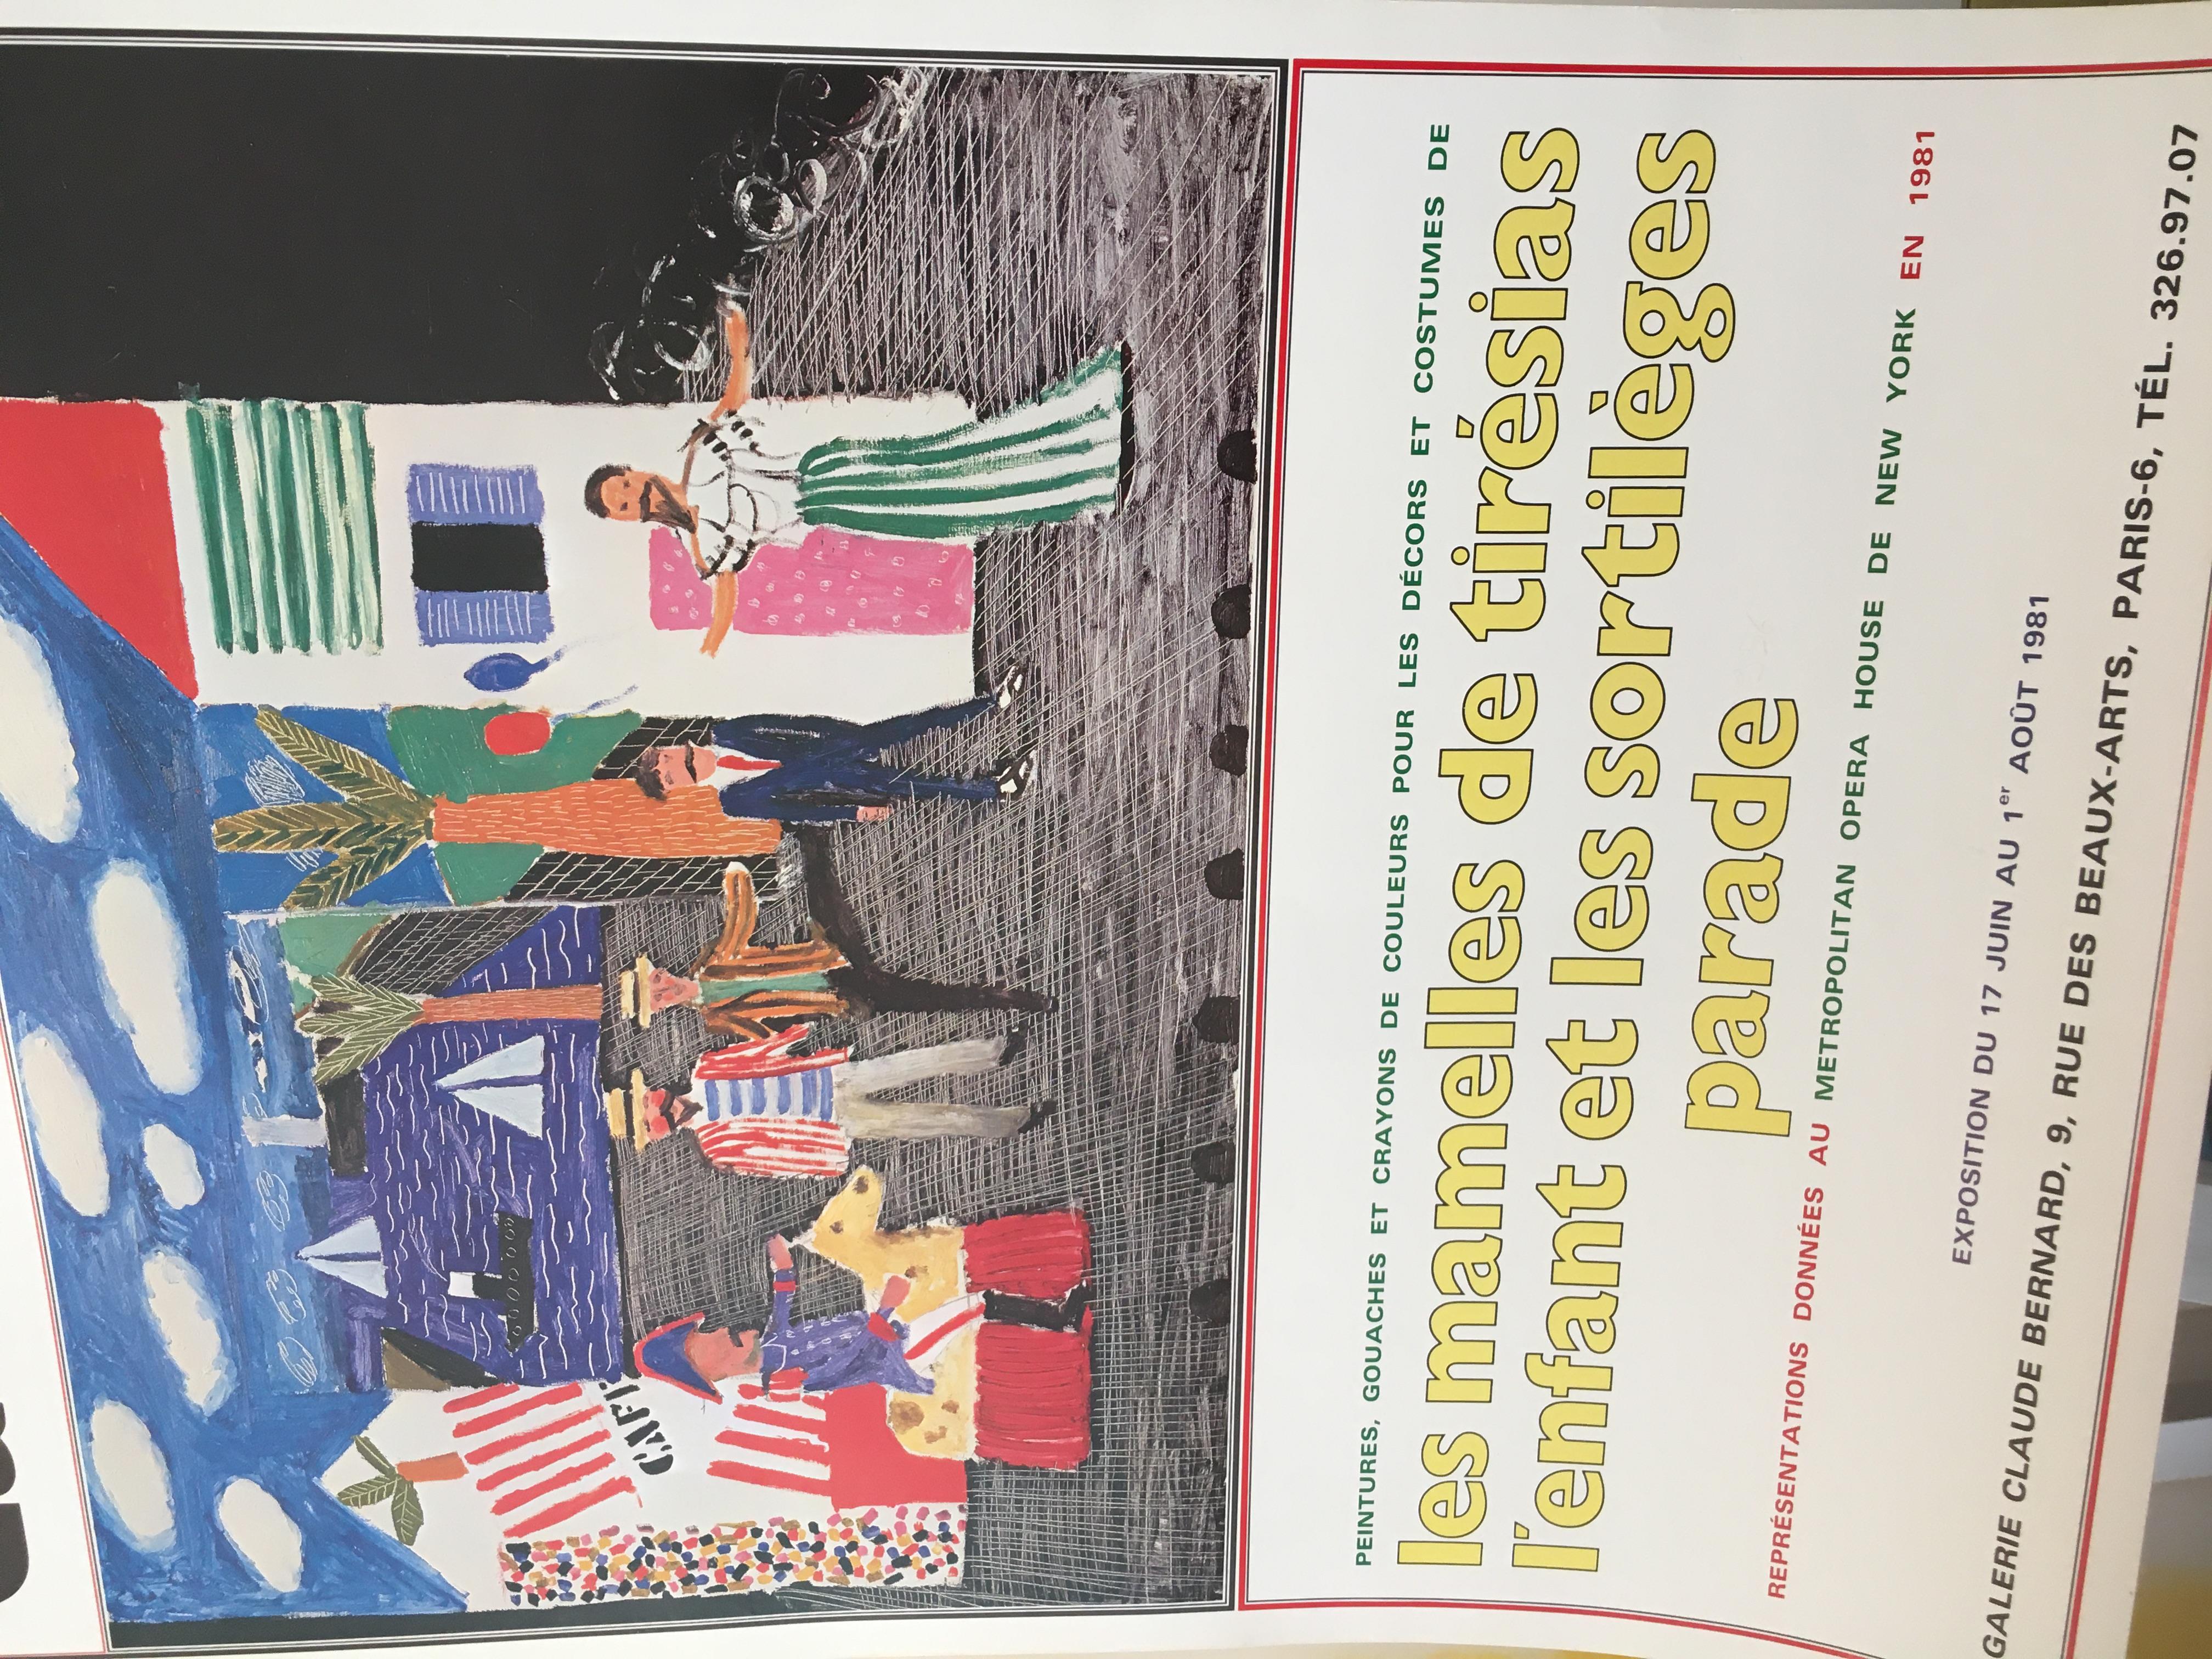 Paper David Hockney Original Exhibition Poster, “THE PARADE OUTDOORS” 1981 For Sale